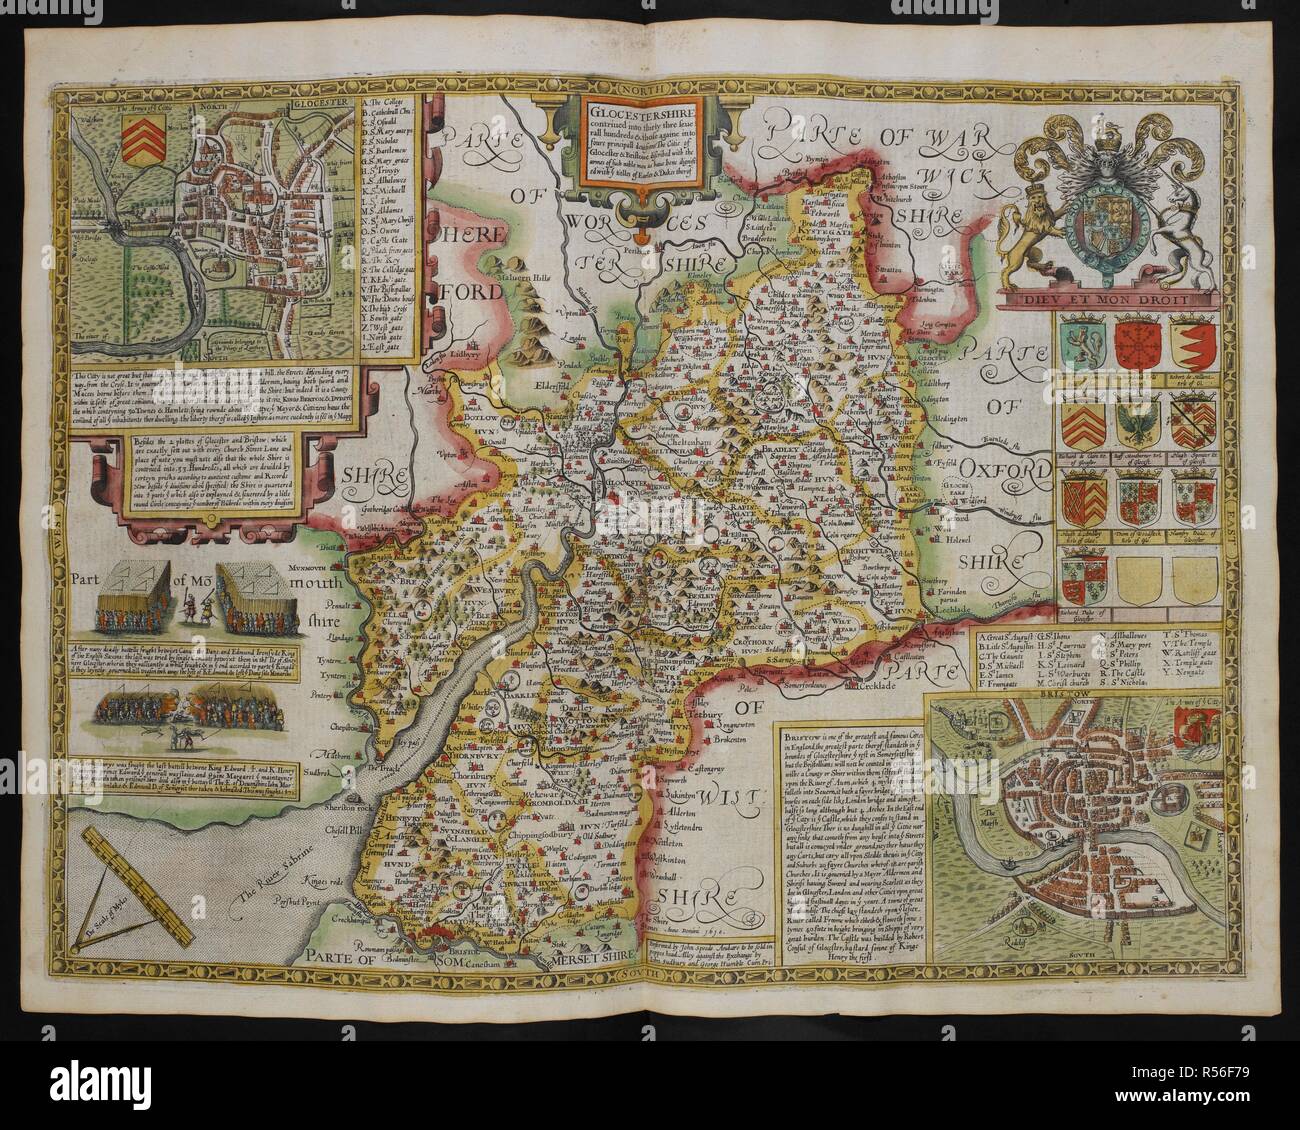 Glocestershire contrived into thirty thre severall hundreds those againe into foure principall devisions the Citie of Glocester & Bristowe discribed with the armes of such noble menas have bene dignified with ye titlles of Earles & Dukes thereof, A.D. 1610. A map of Gloucestershire; insets, the cities of Gloucester and Bristol. The Theatre of the Empire of Great Britain. London : John Sudbury & George Humble, 1611. Source: Maps C.7.c.20.(2.), f.47. Author: SPEED, JOHN. Stock Photo